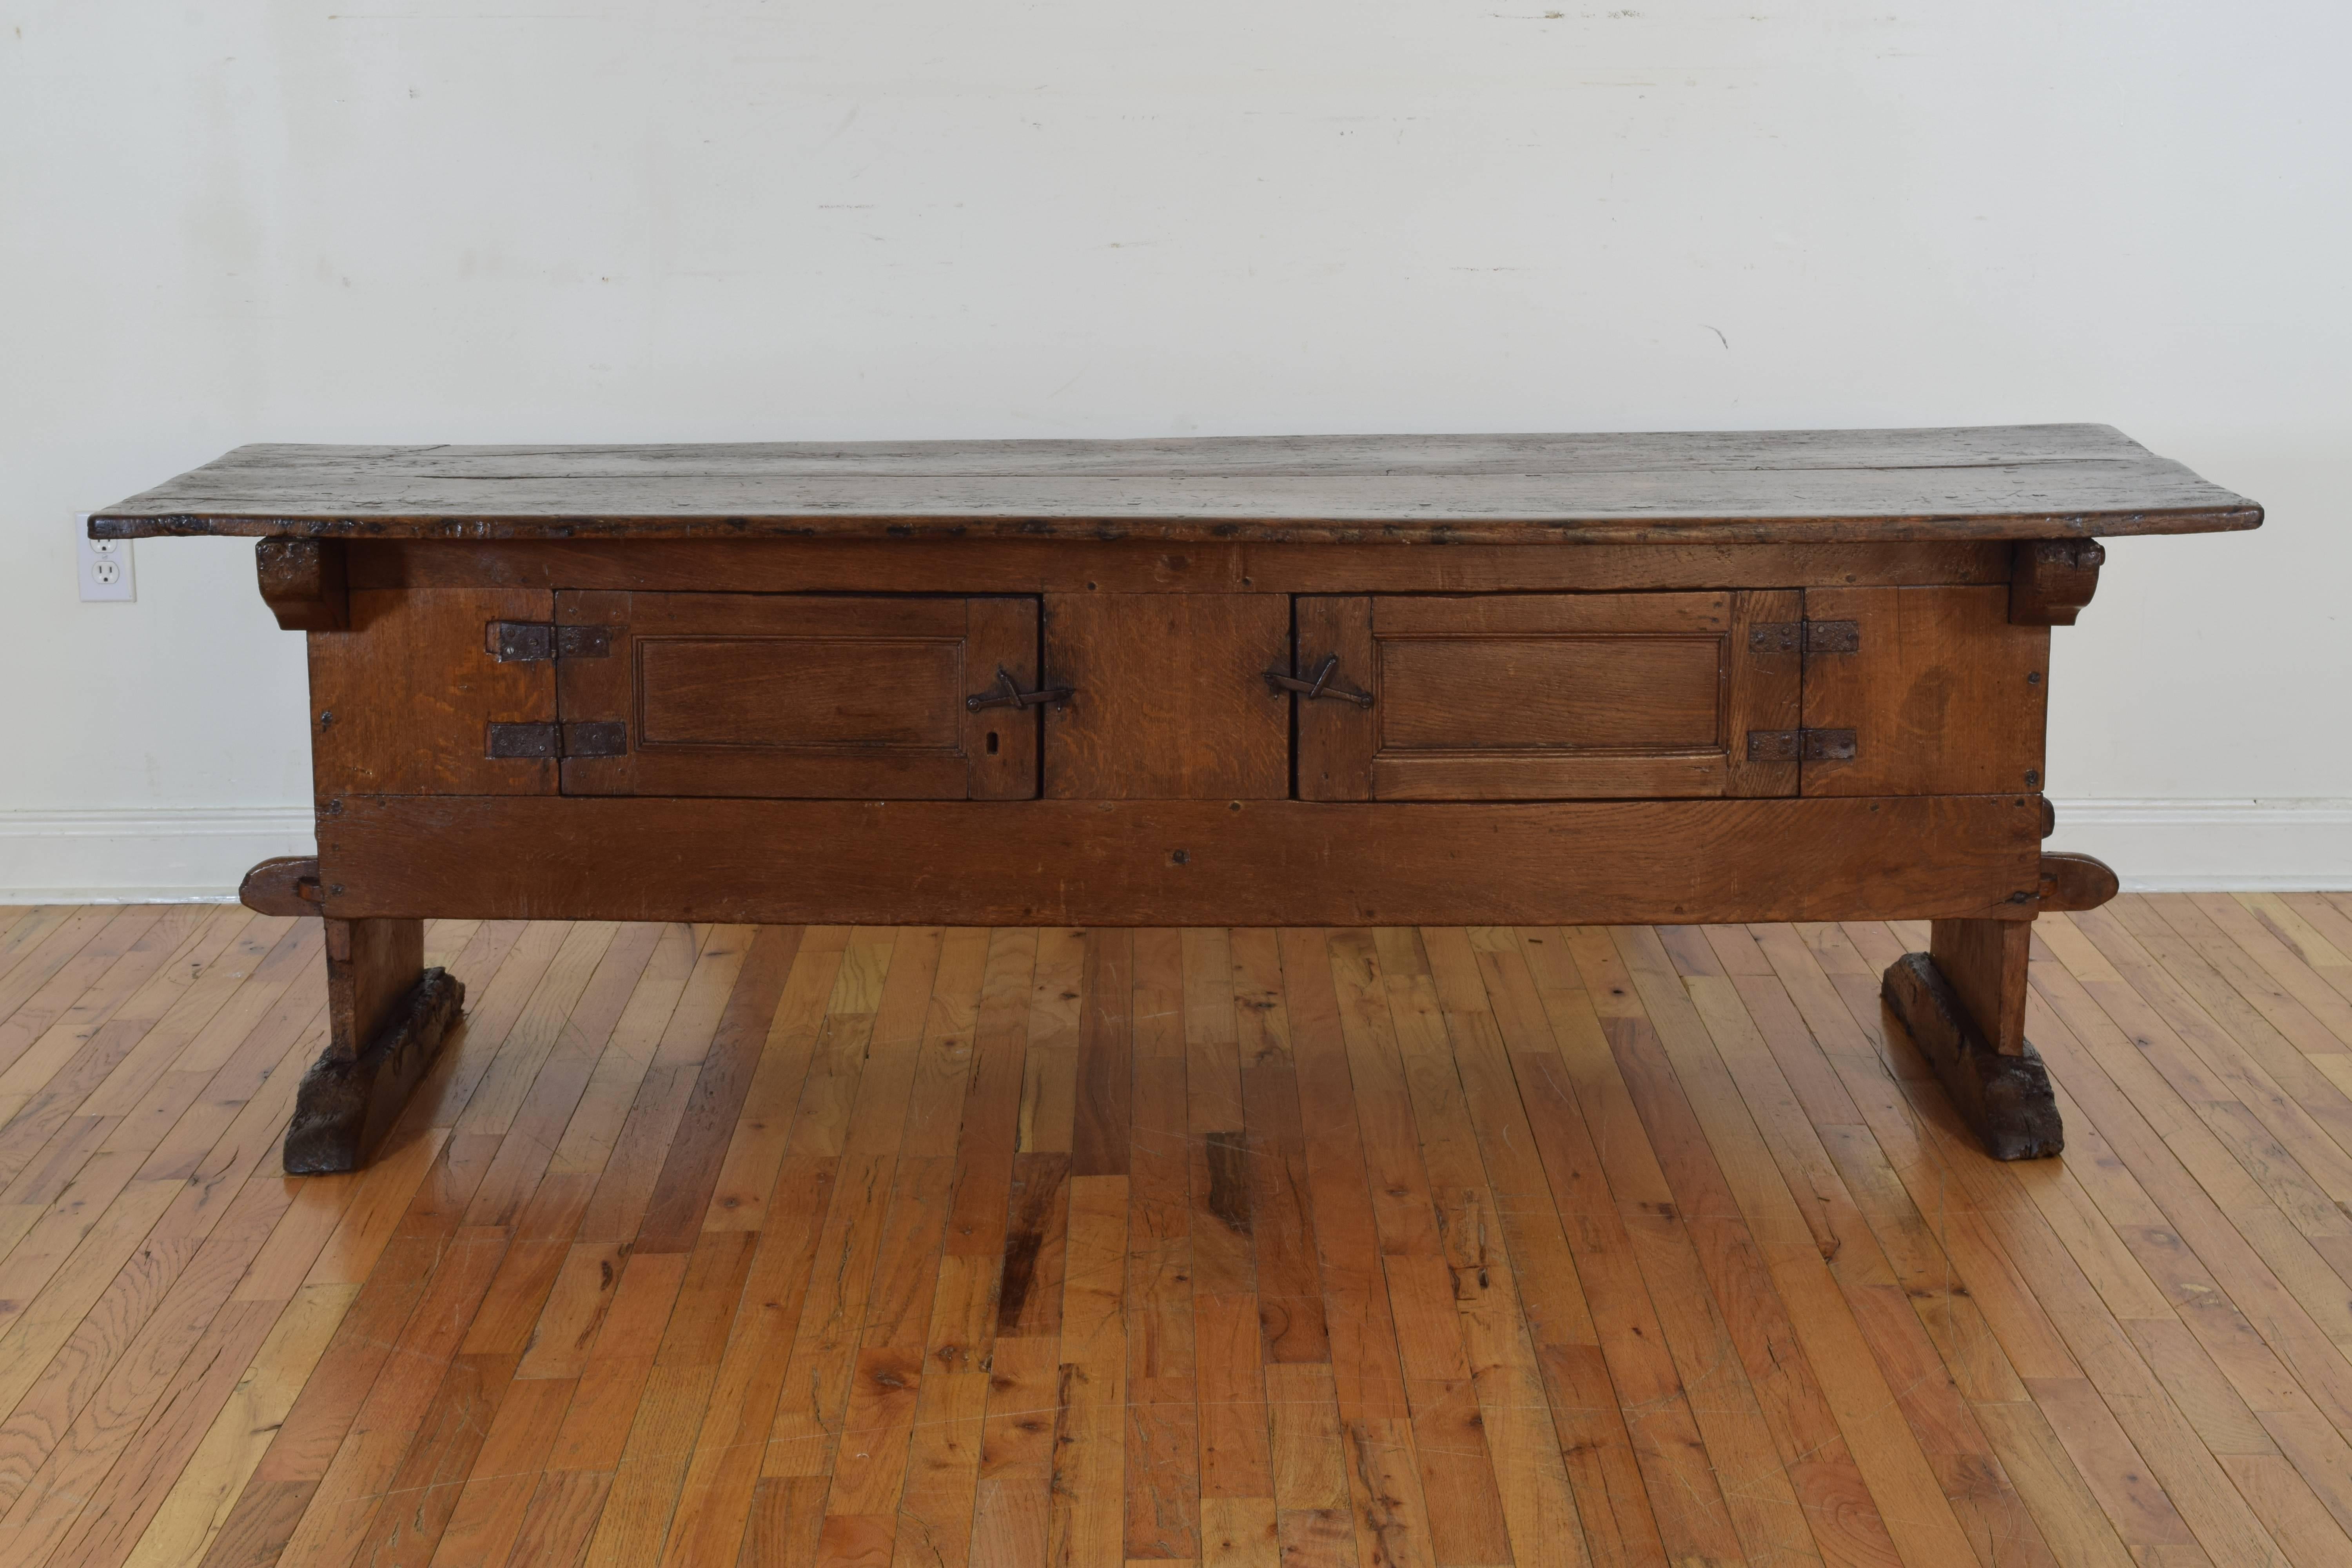 Baroque Unusual Swiss Oak Rustic Table with Hinged Doors, 17th-18th Century